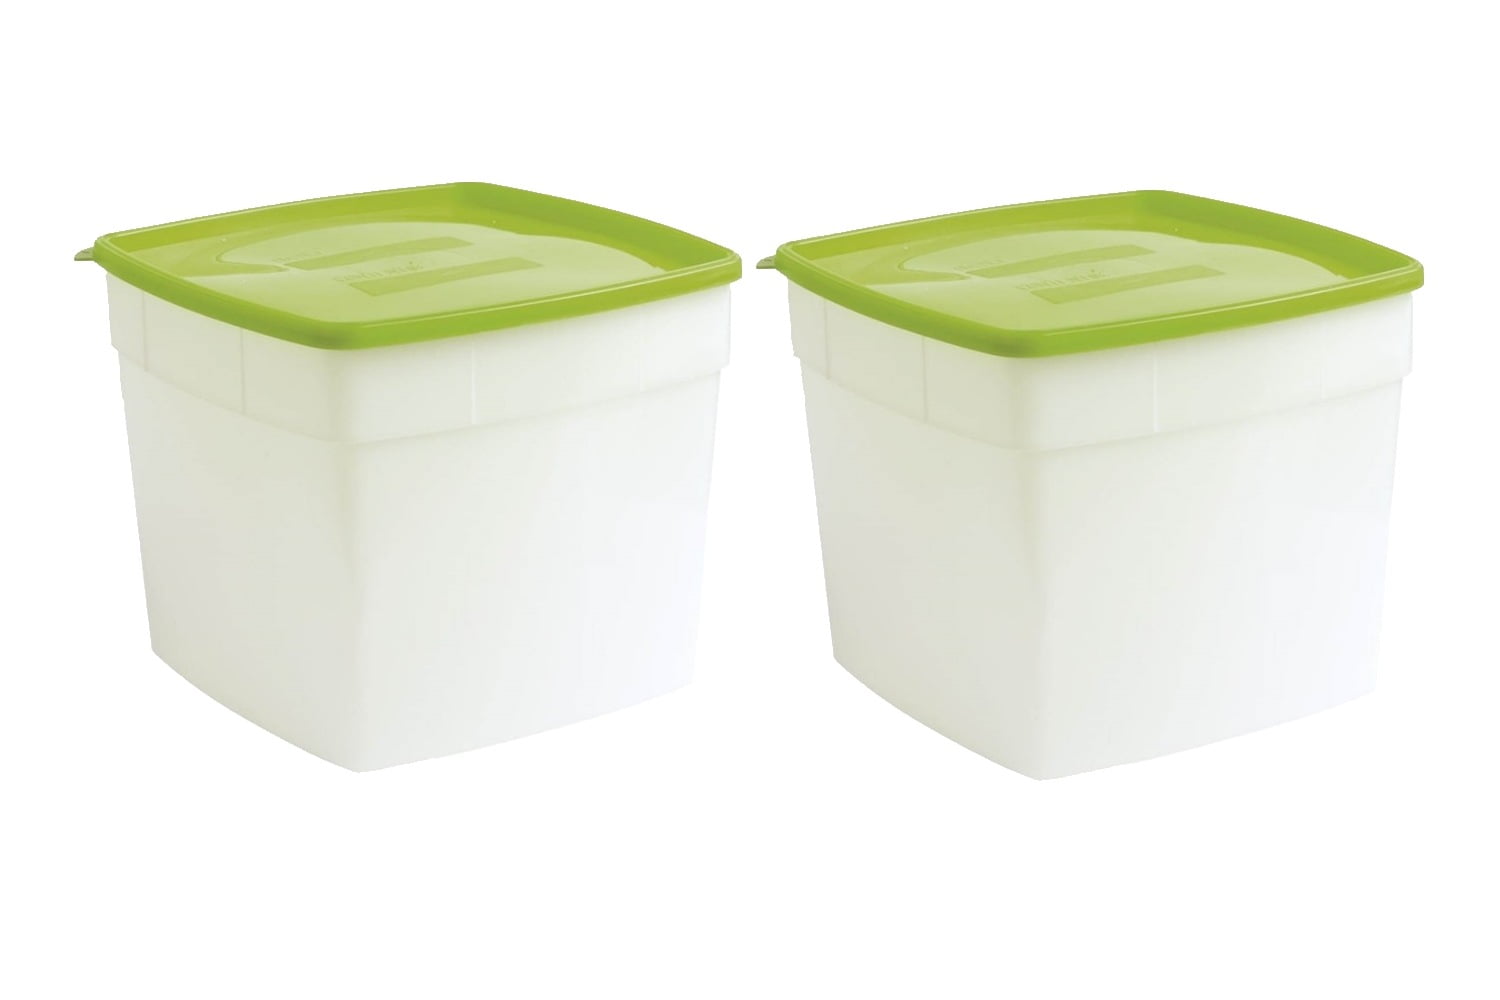 Arrow Home Products 1 pt Stor-Keeper Freezer Storage Containers - 5 pack -  04201